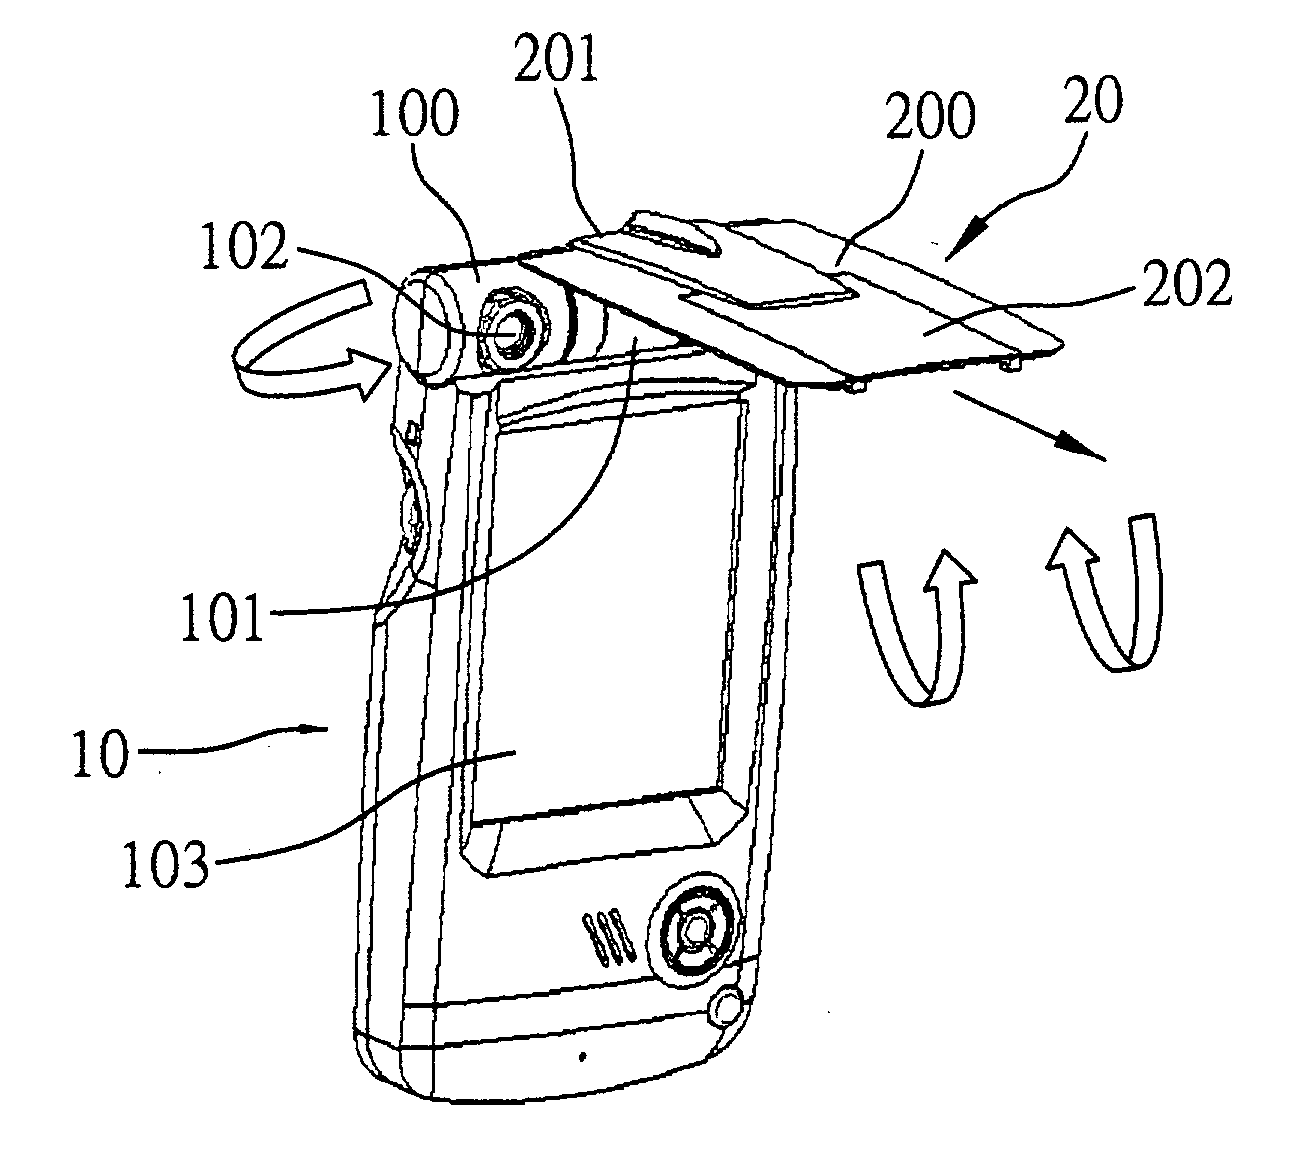 Image capture apparatus with a protection flip cover that clips leaf-like objects